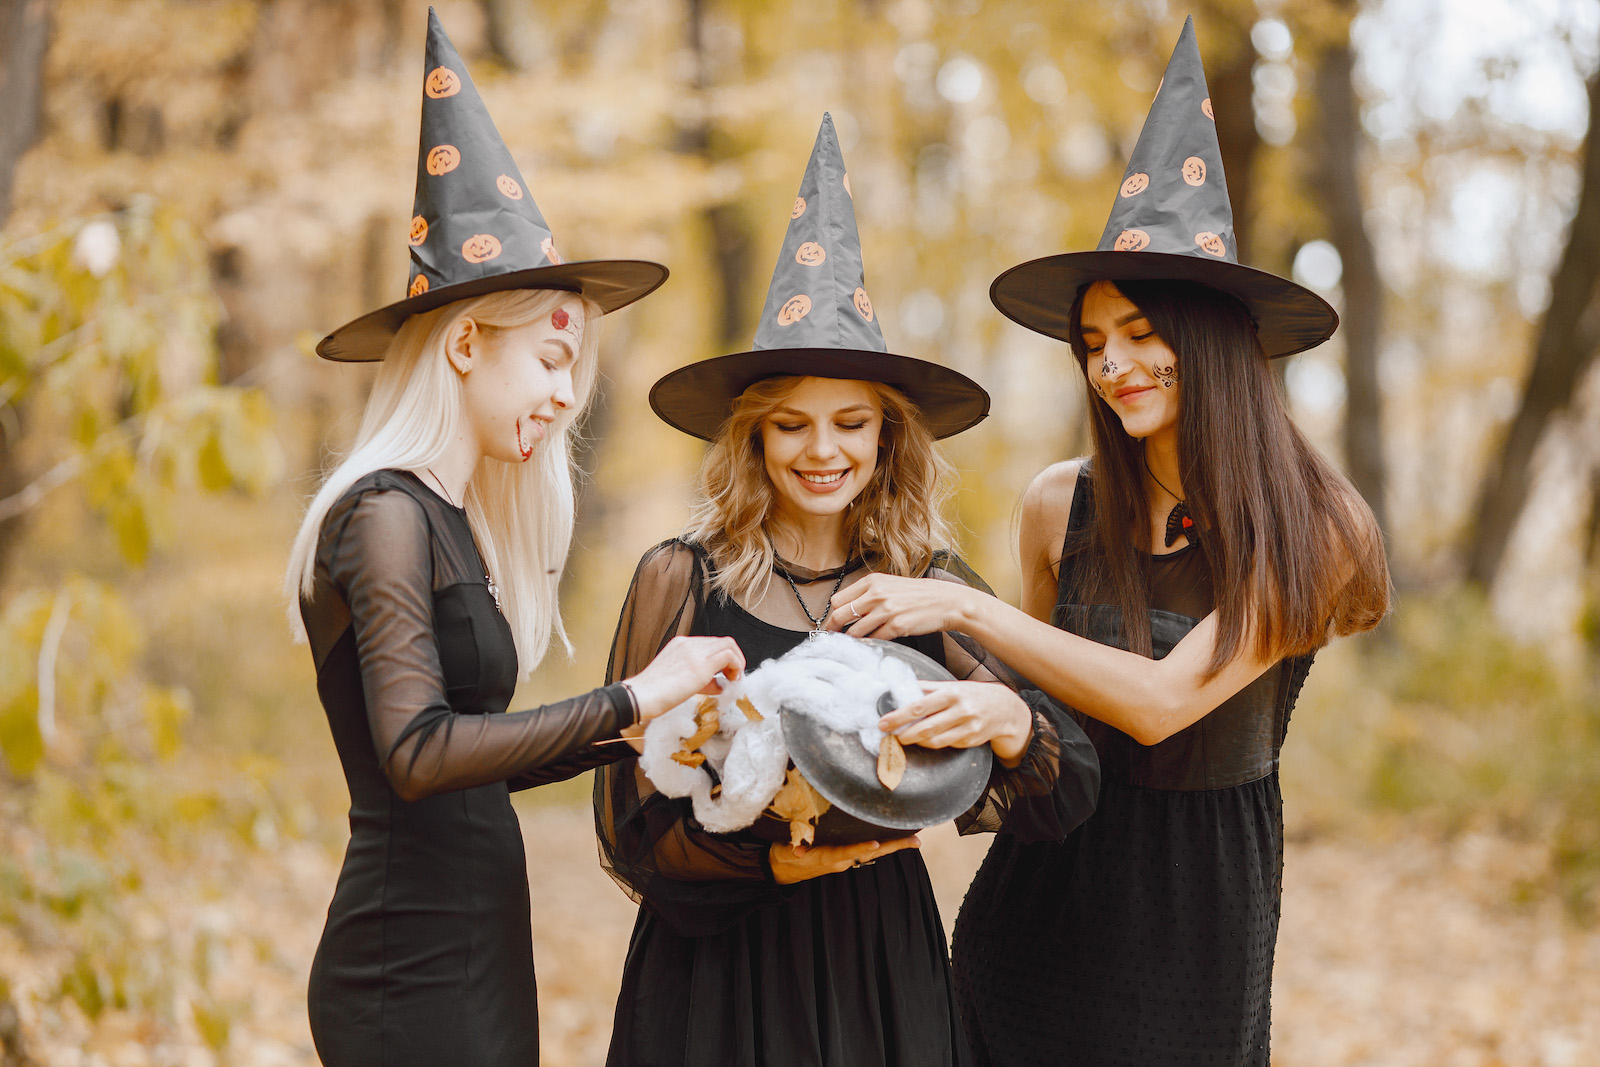 .three witches